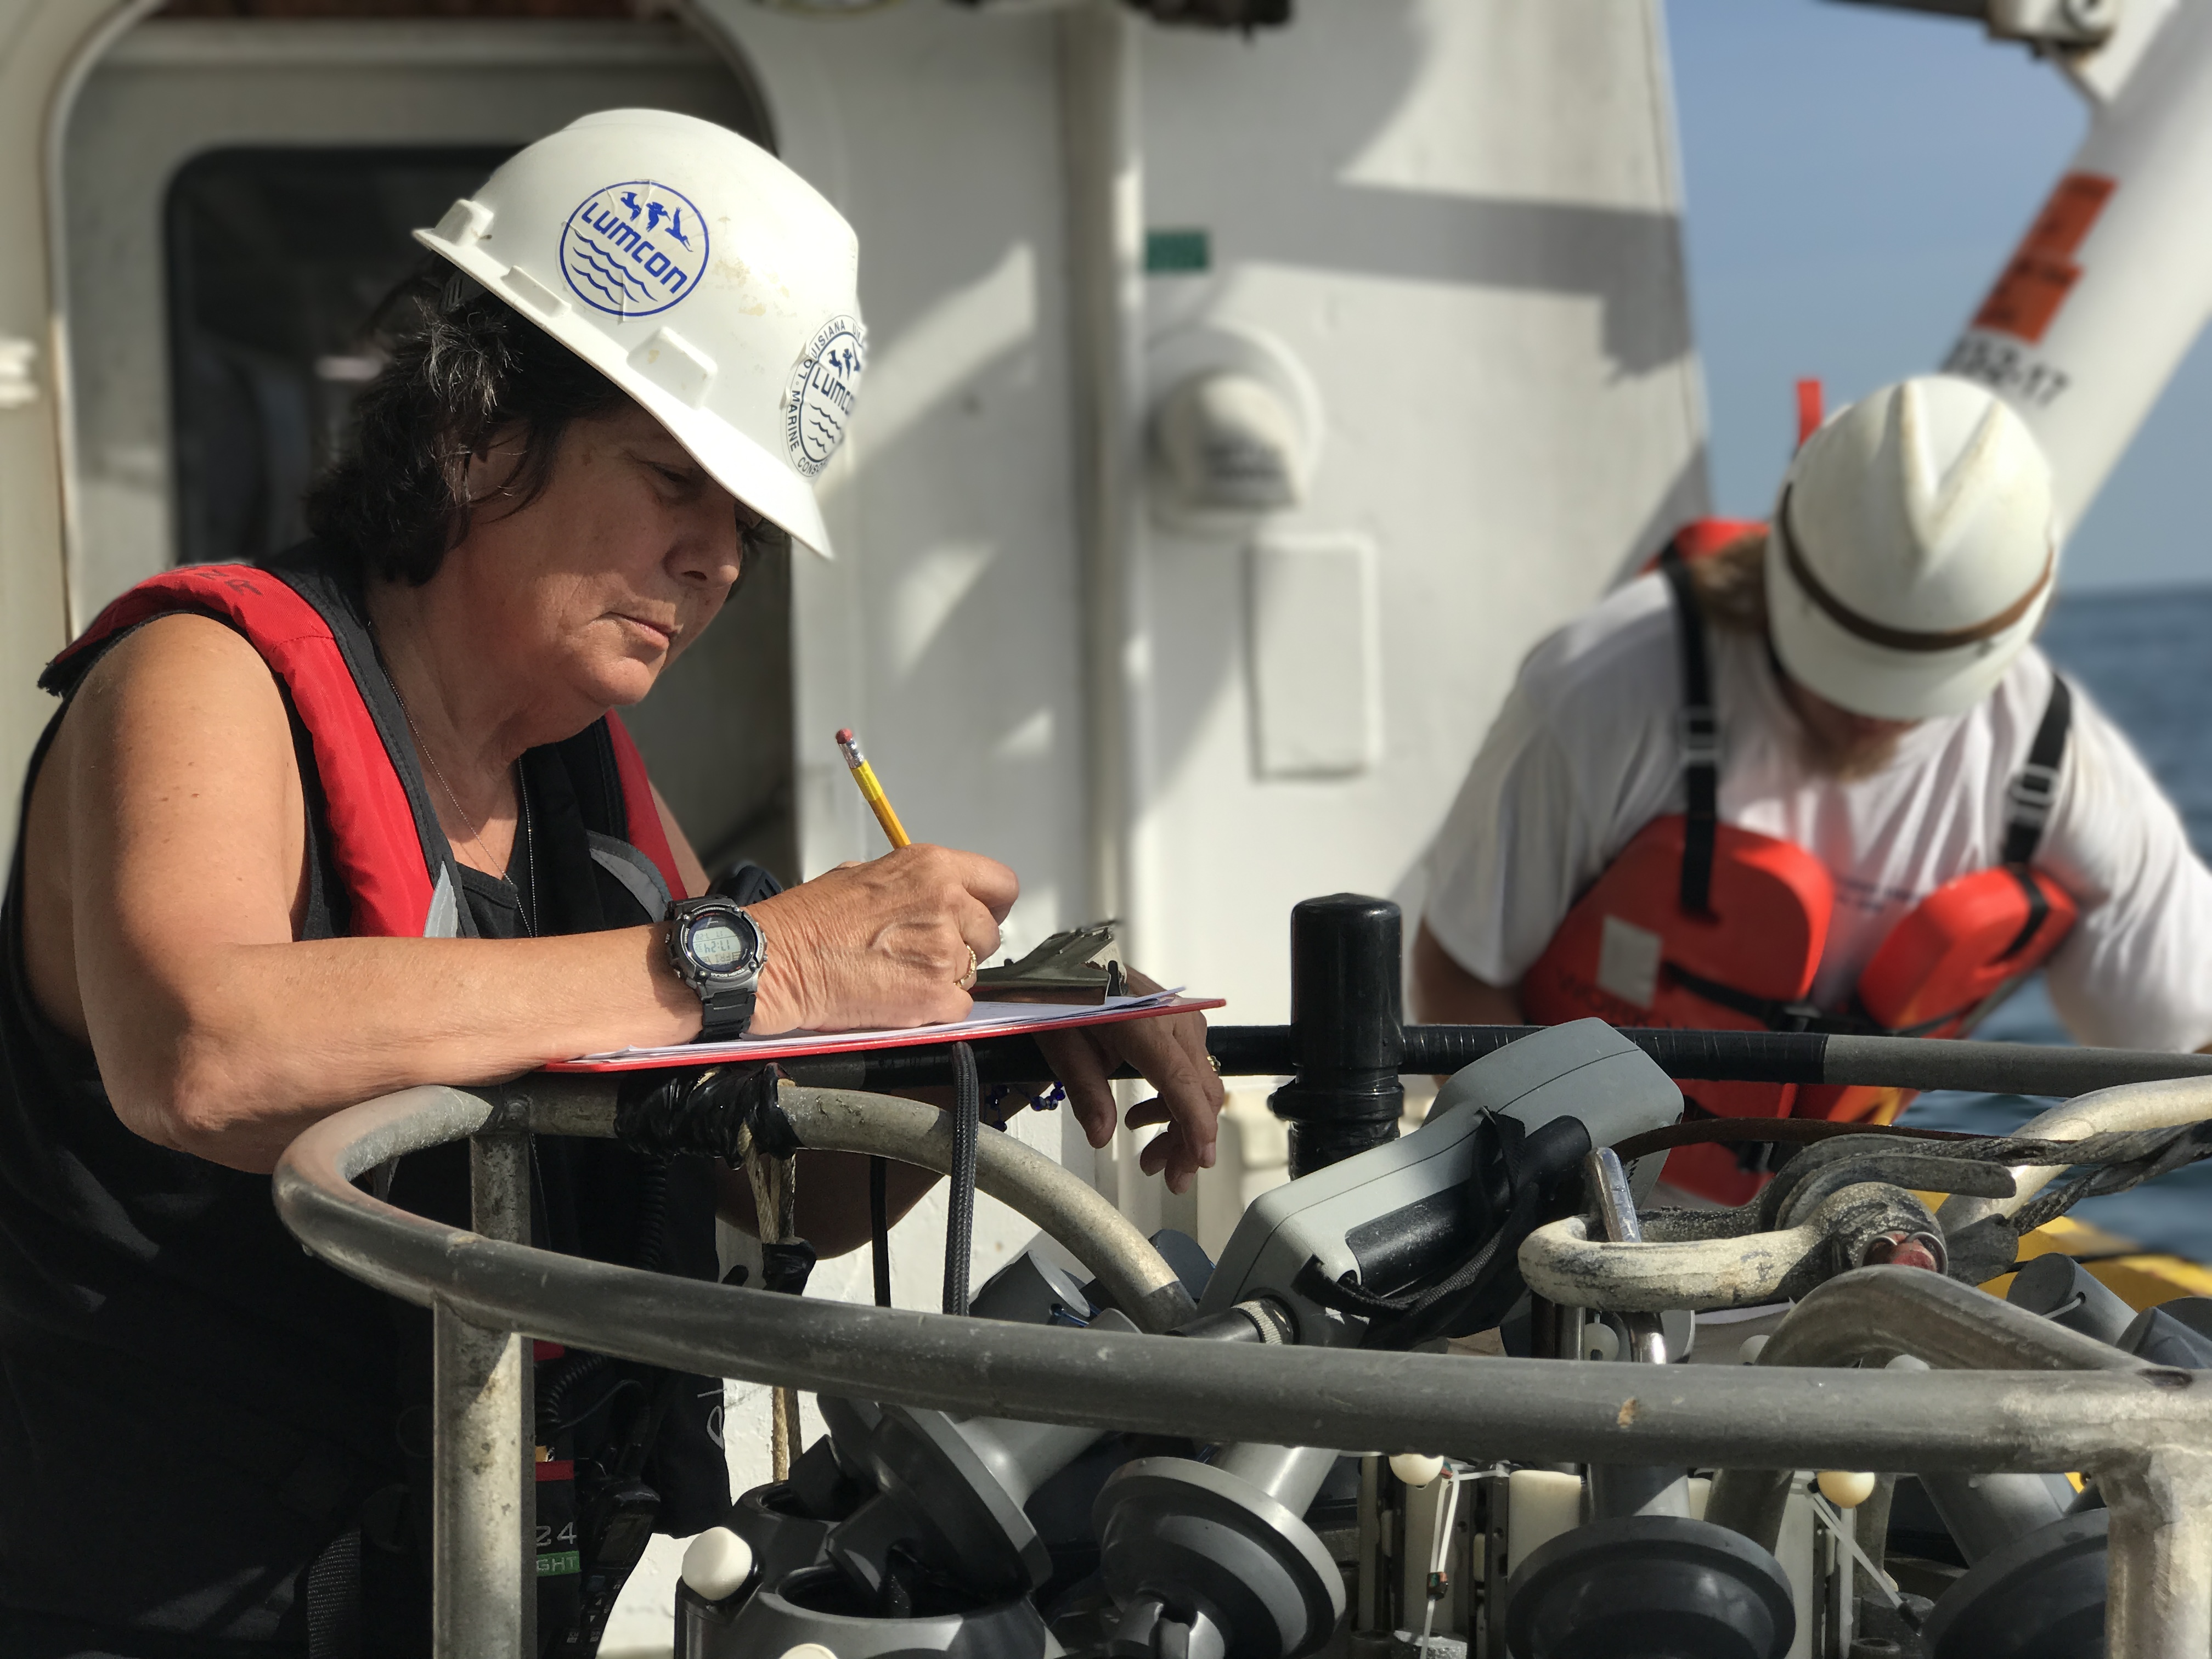 Nancy Rablais and a colleague, both wearing a white protective hard hat, doing work on a boat.